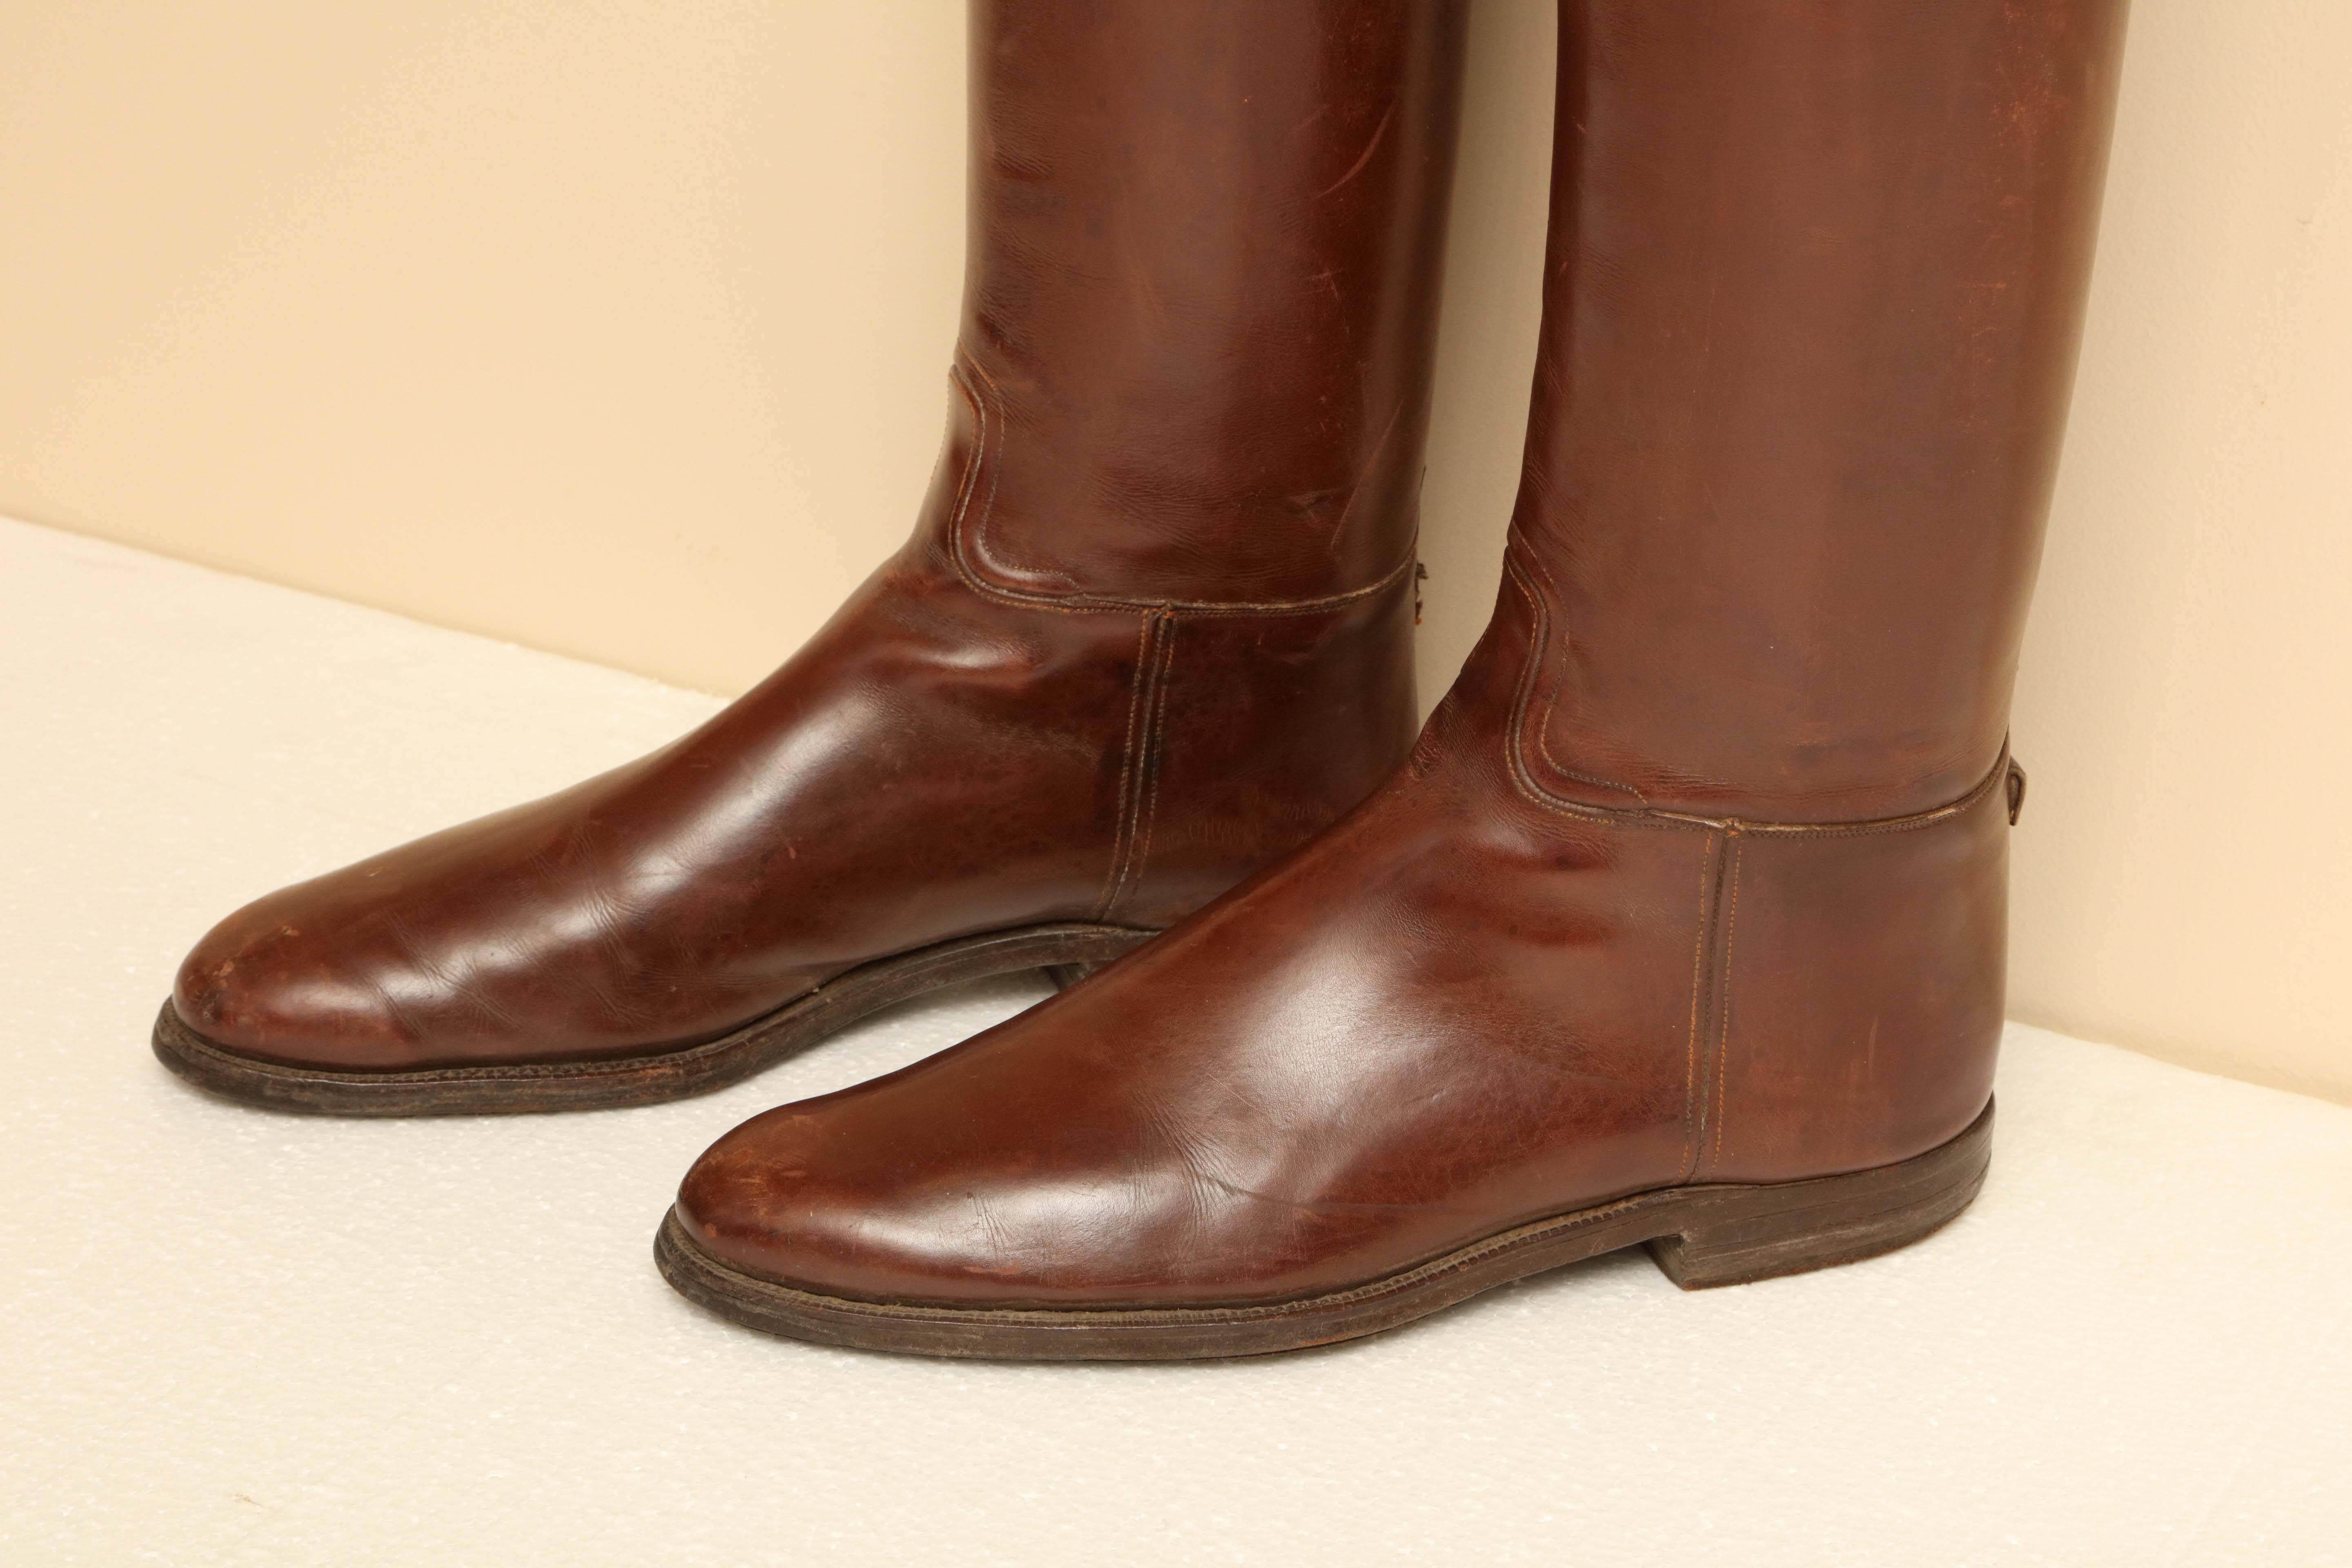 Pair of English riding boots with custom wooden boot trees.
Inside length is 27 centimeters.
9.5 U.K.
10 U.S.
Narrow.